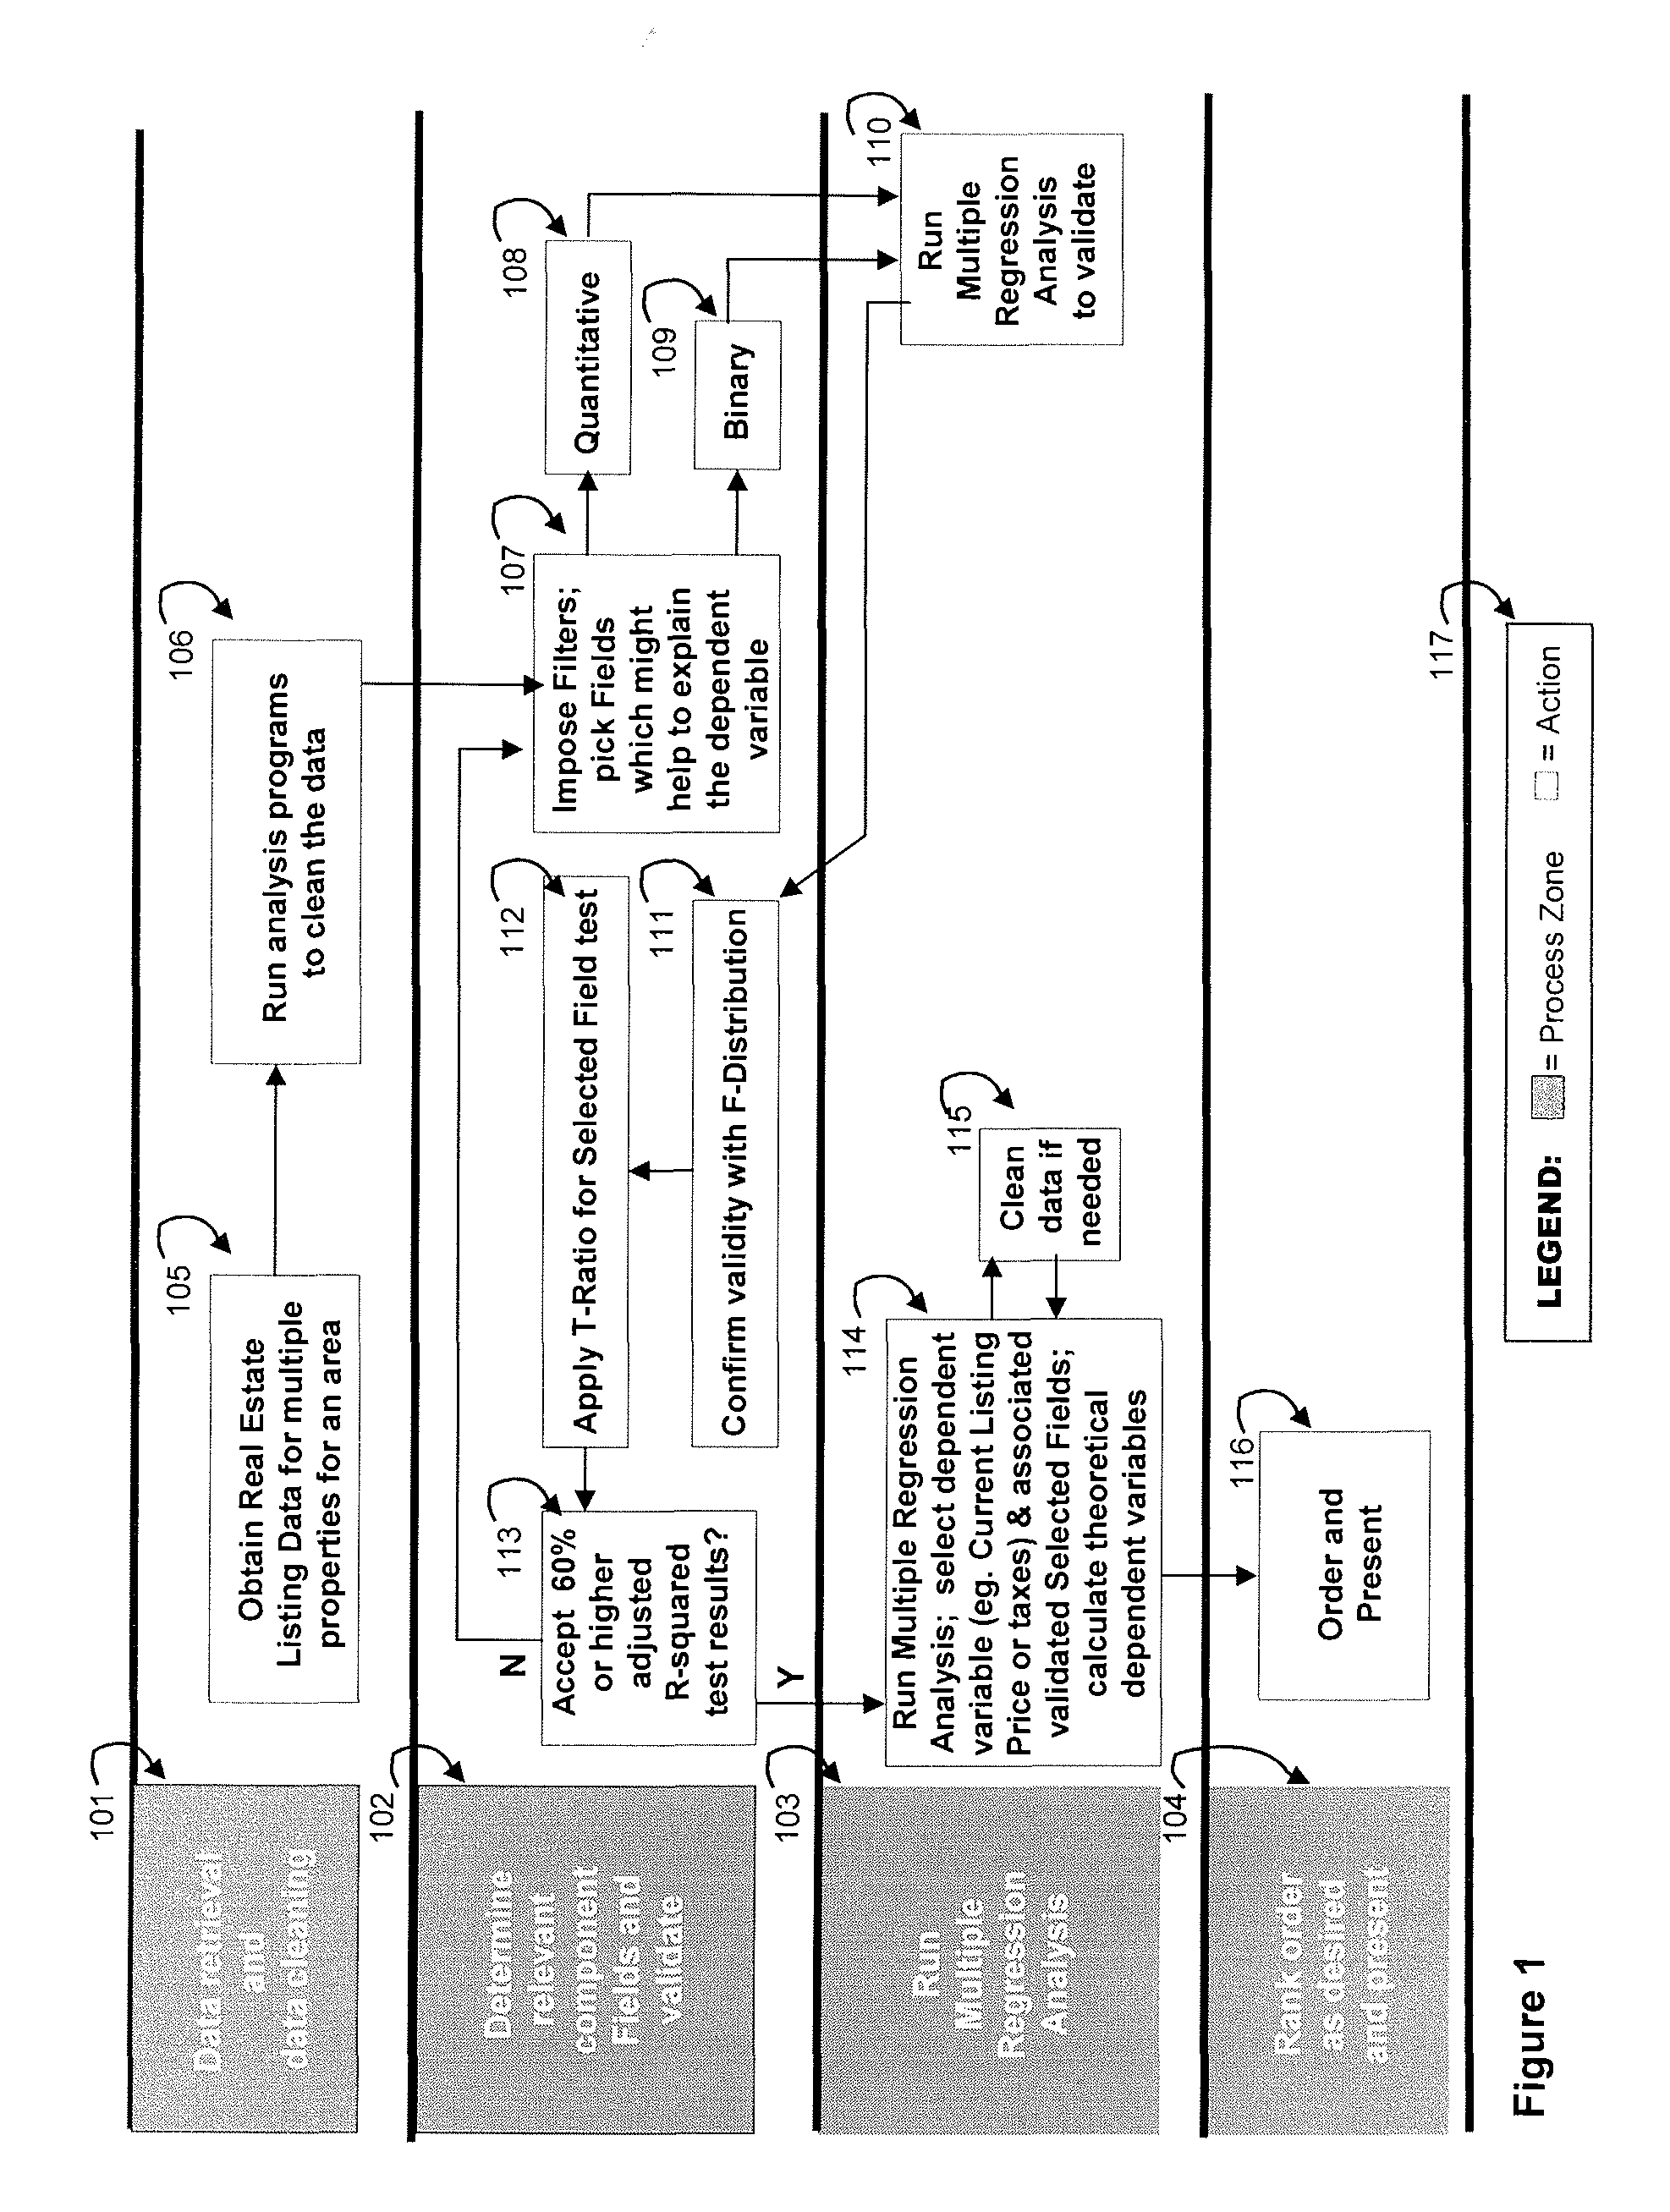 System and Method for Determining a Real Estate Property Valuation